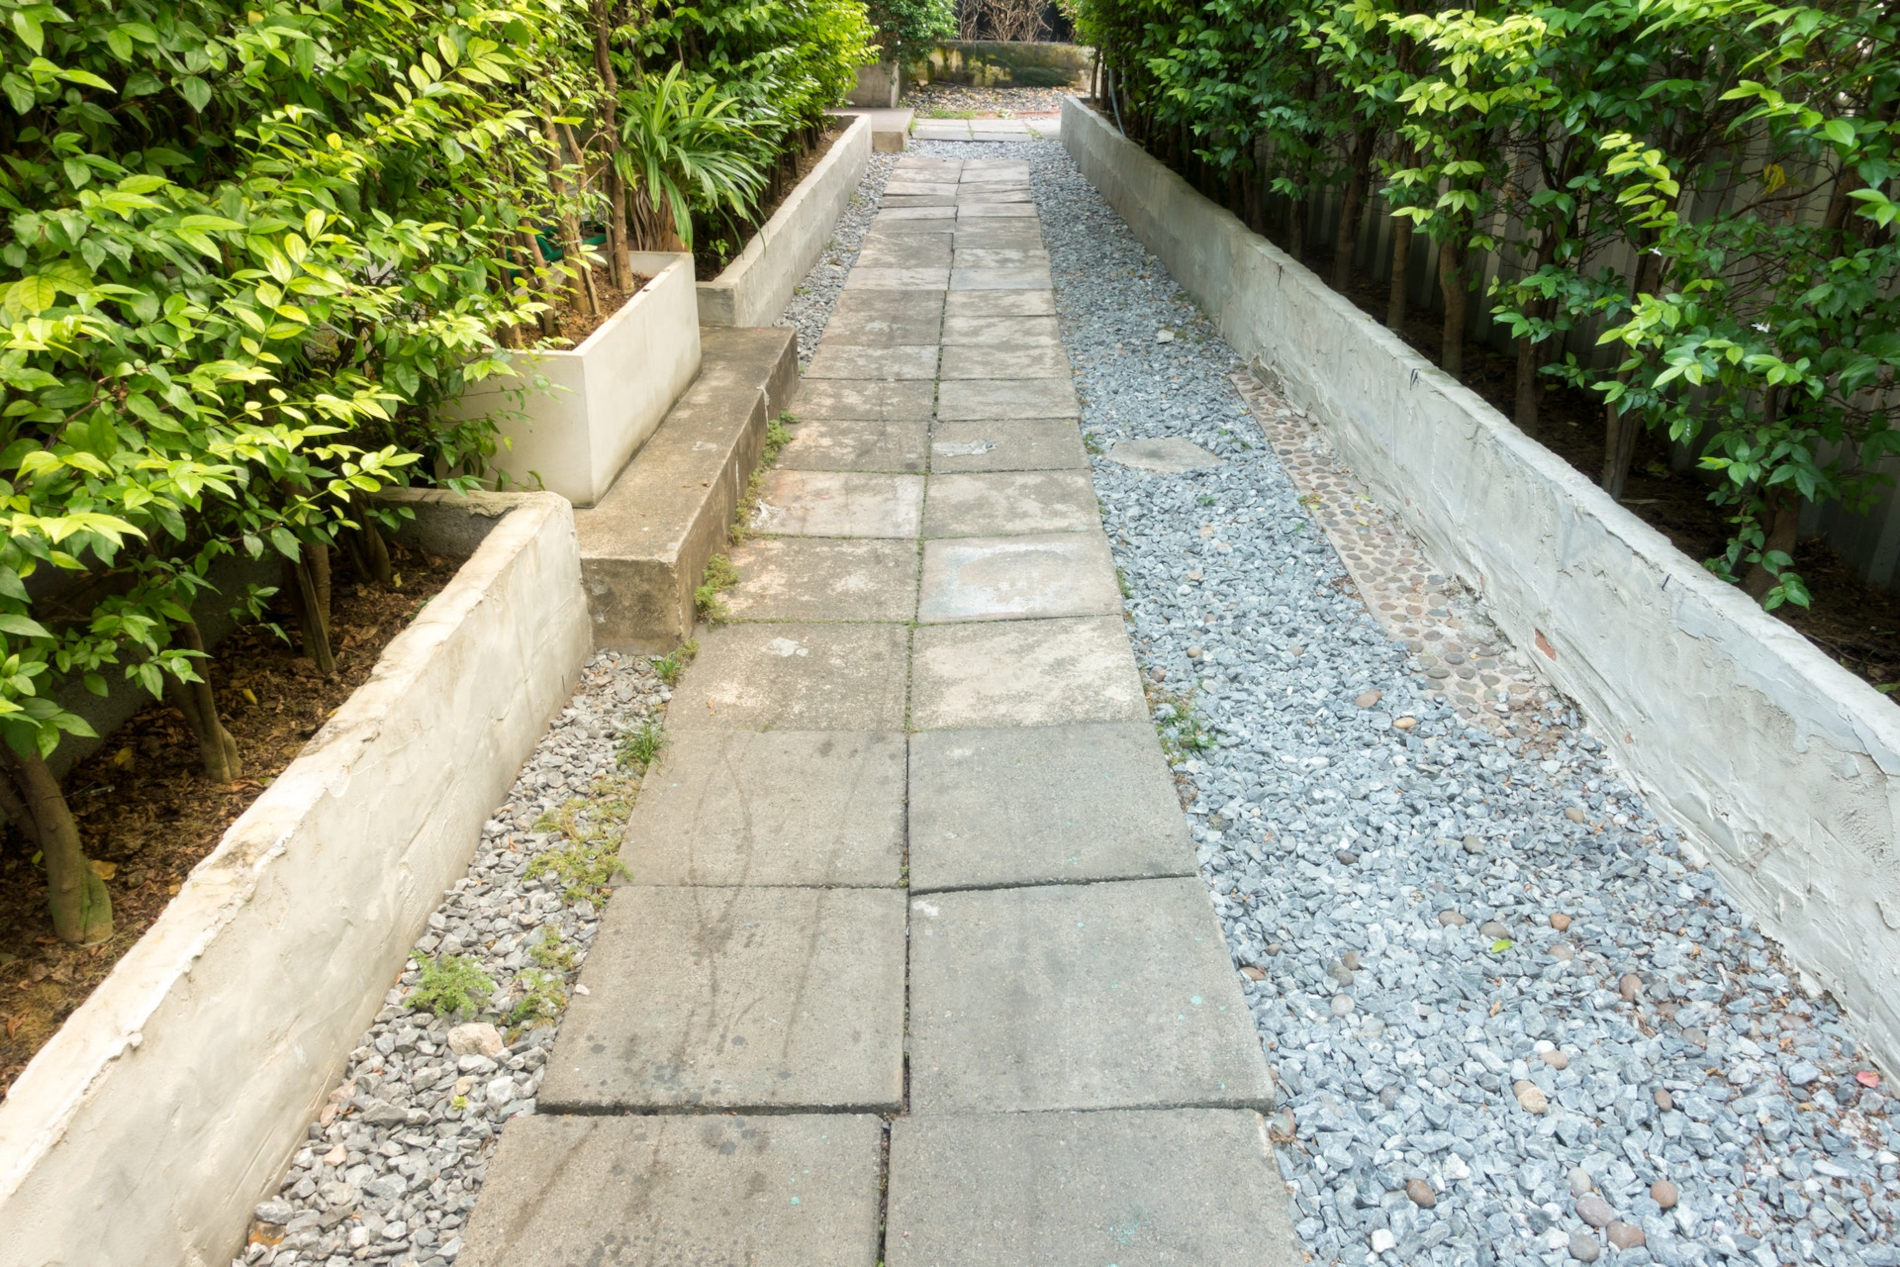 Stone and gravel pathway with landscaping